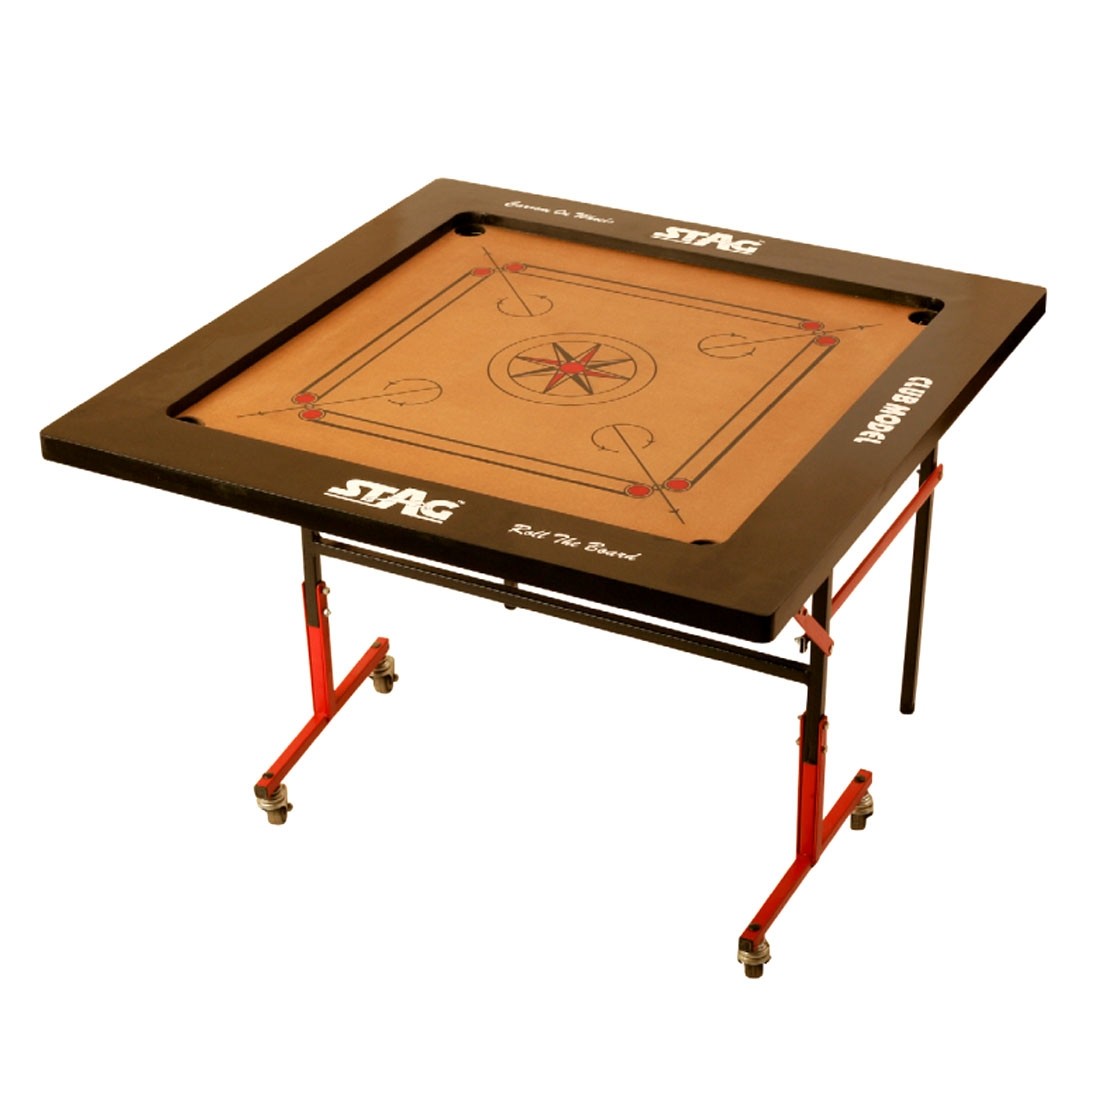 STAG CARROM BOARD CLUB 2.5" BORDER 6MM M.D.F. WITH LOW STAND